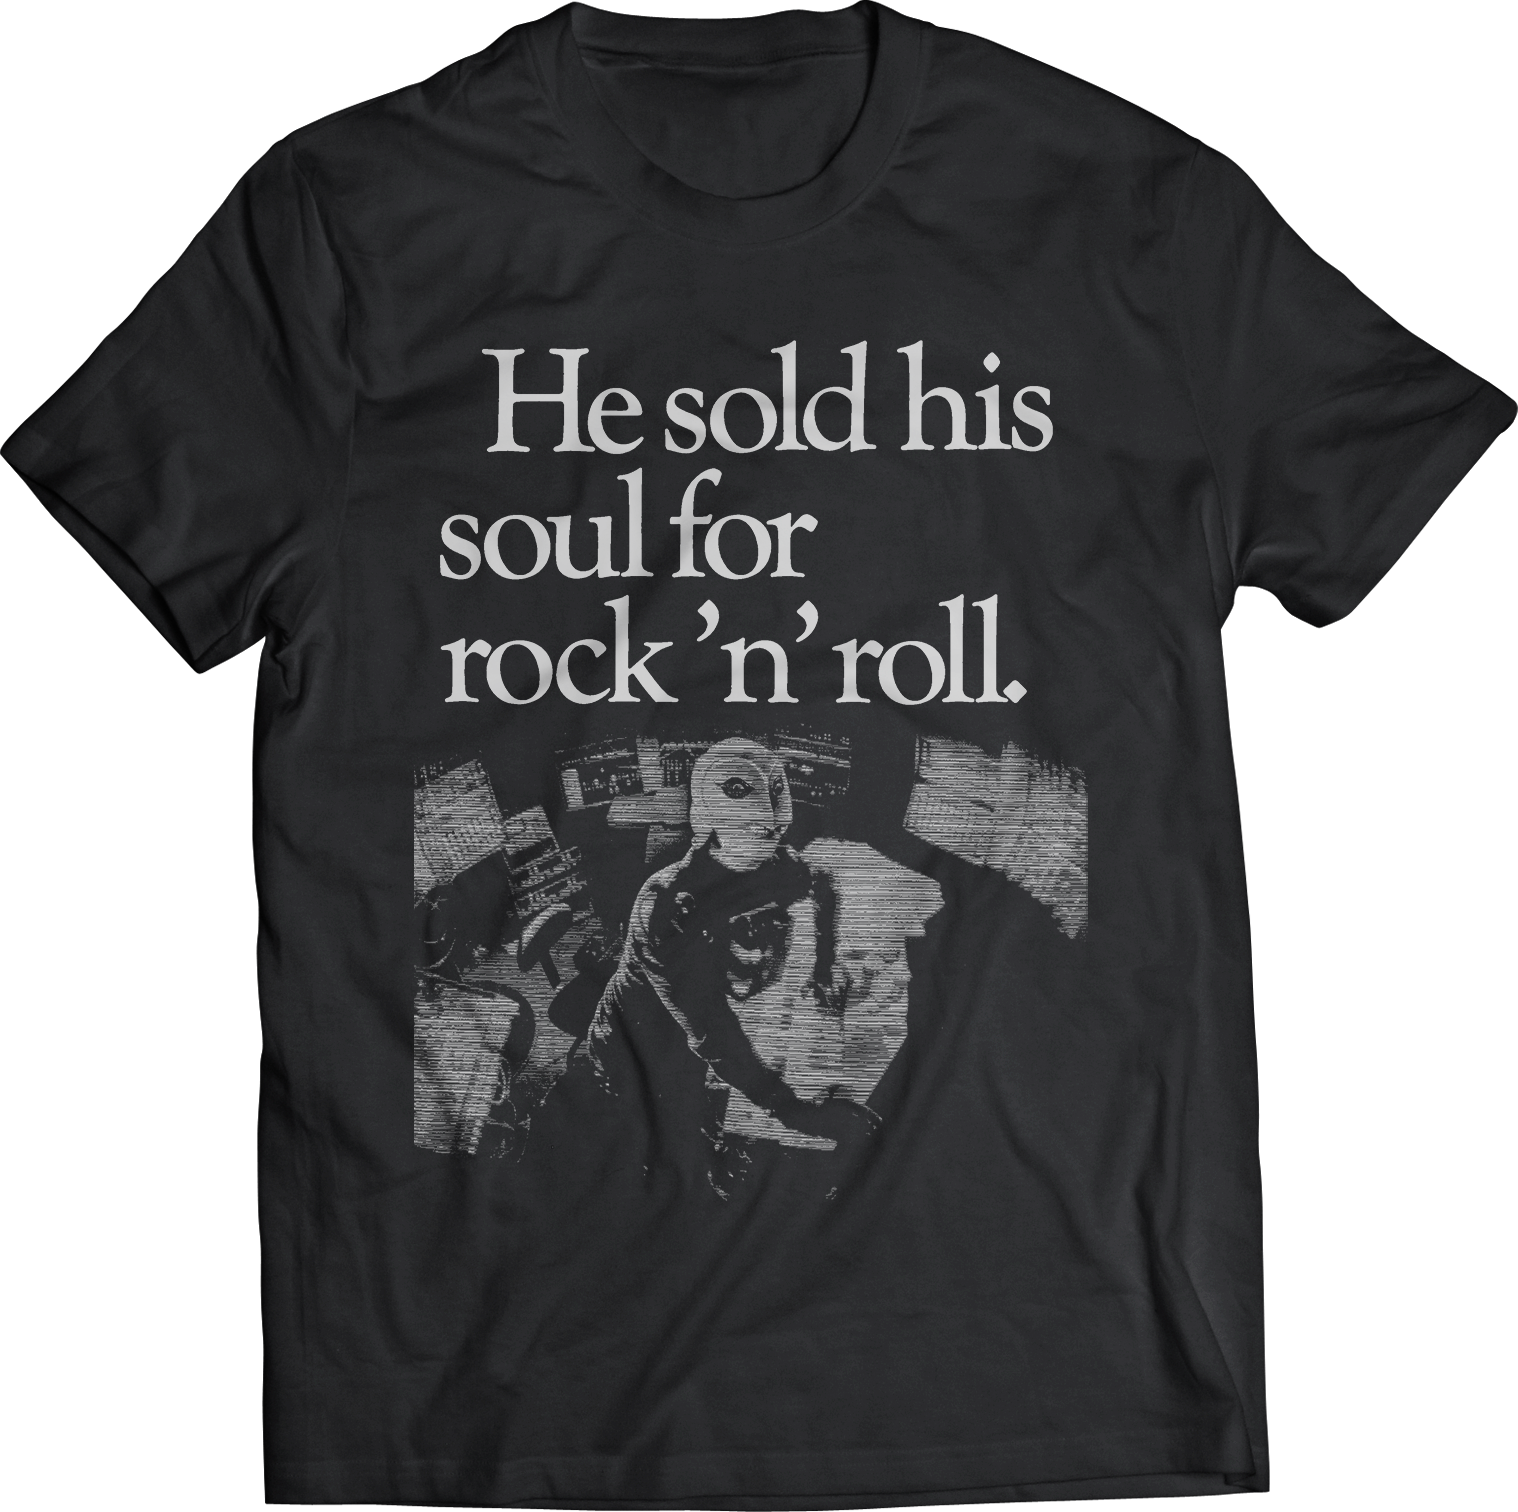 PHANTOM OF THE PARADISE "HE SOLD HIS SOUL FOR ROCK 'N ROLL" T-SHIRT